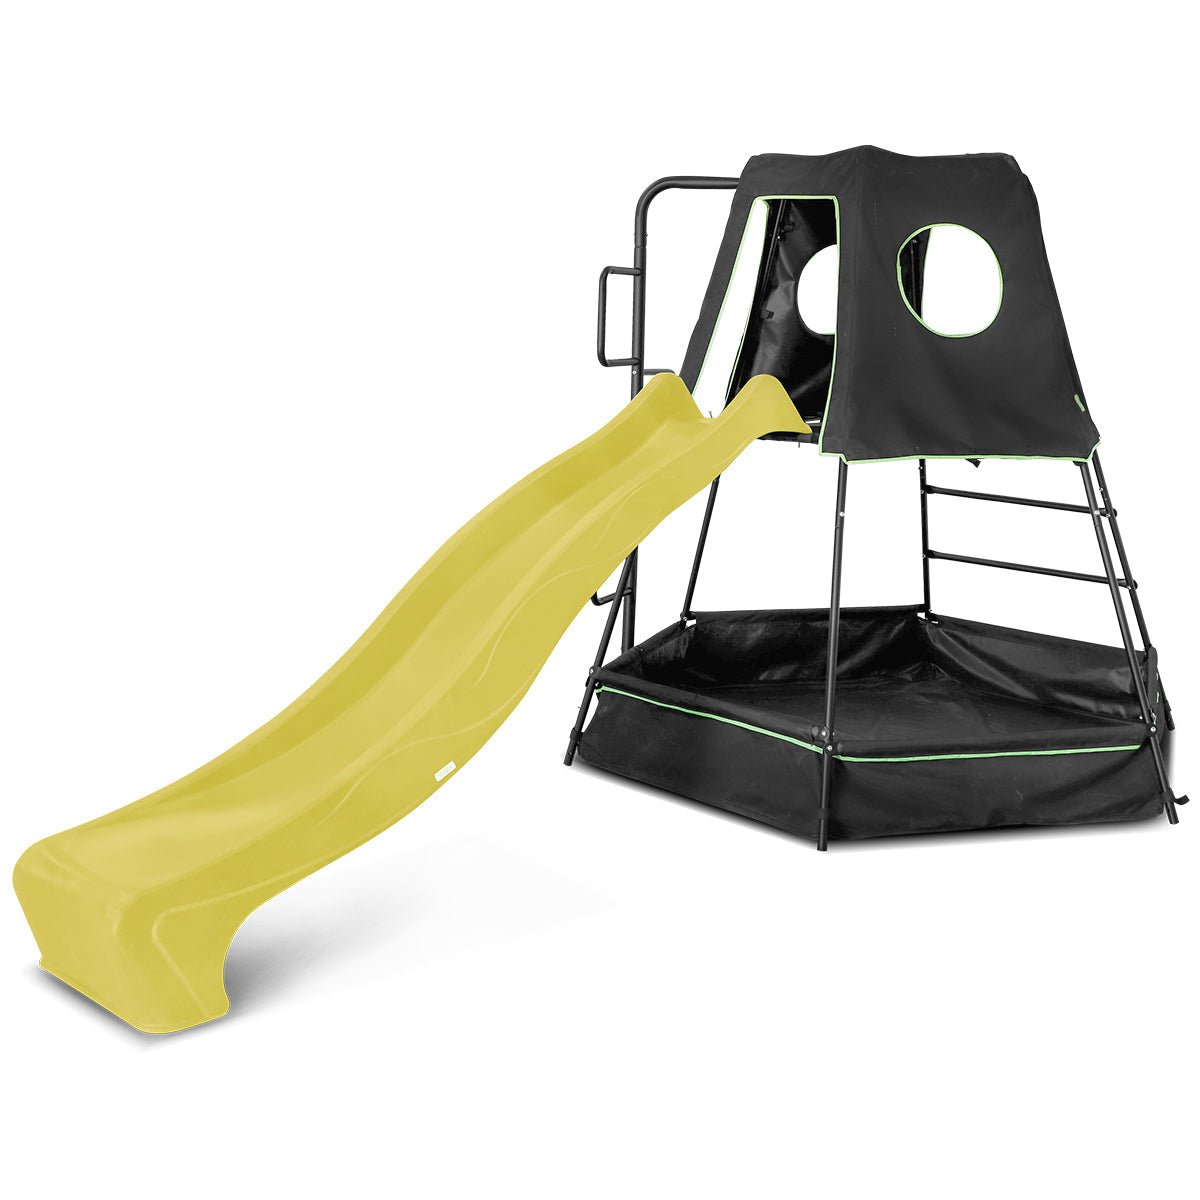 Elevate Play: Pallas Play Tower Yellow Slide with Sand Pit - Buy Now